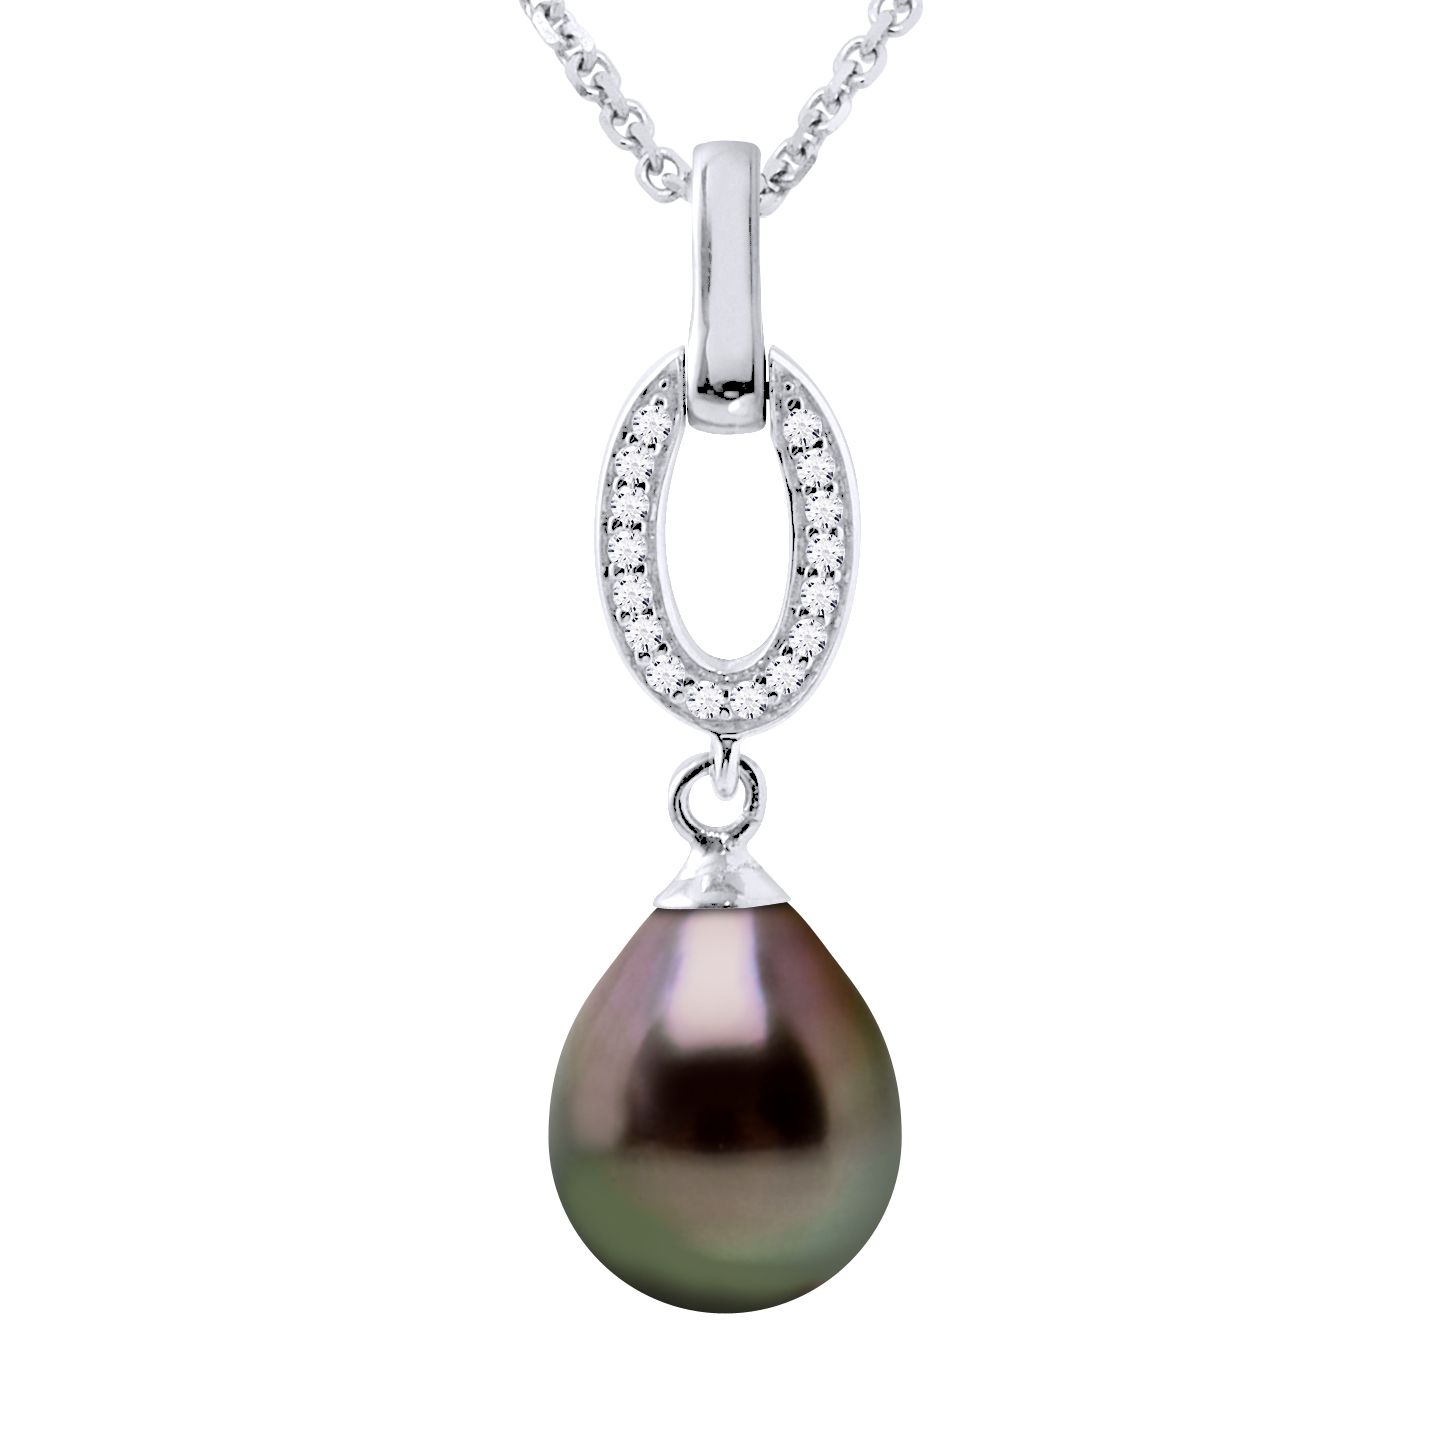 Necklace made with Cultured Tahitian Pearl Pear Shape 8-9 mm , 0,31 in - set with zirconium oxide and chain mesh 925 Sterling Silver Rhodium-plated Length 42 cm , 16,5 in - Our jewellery is made in France and will be delivered in a gift box accompanied by a Certificate of Authenticity and International Warranty